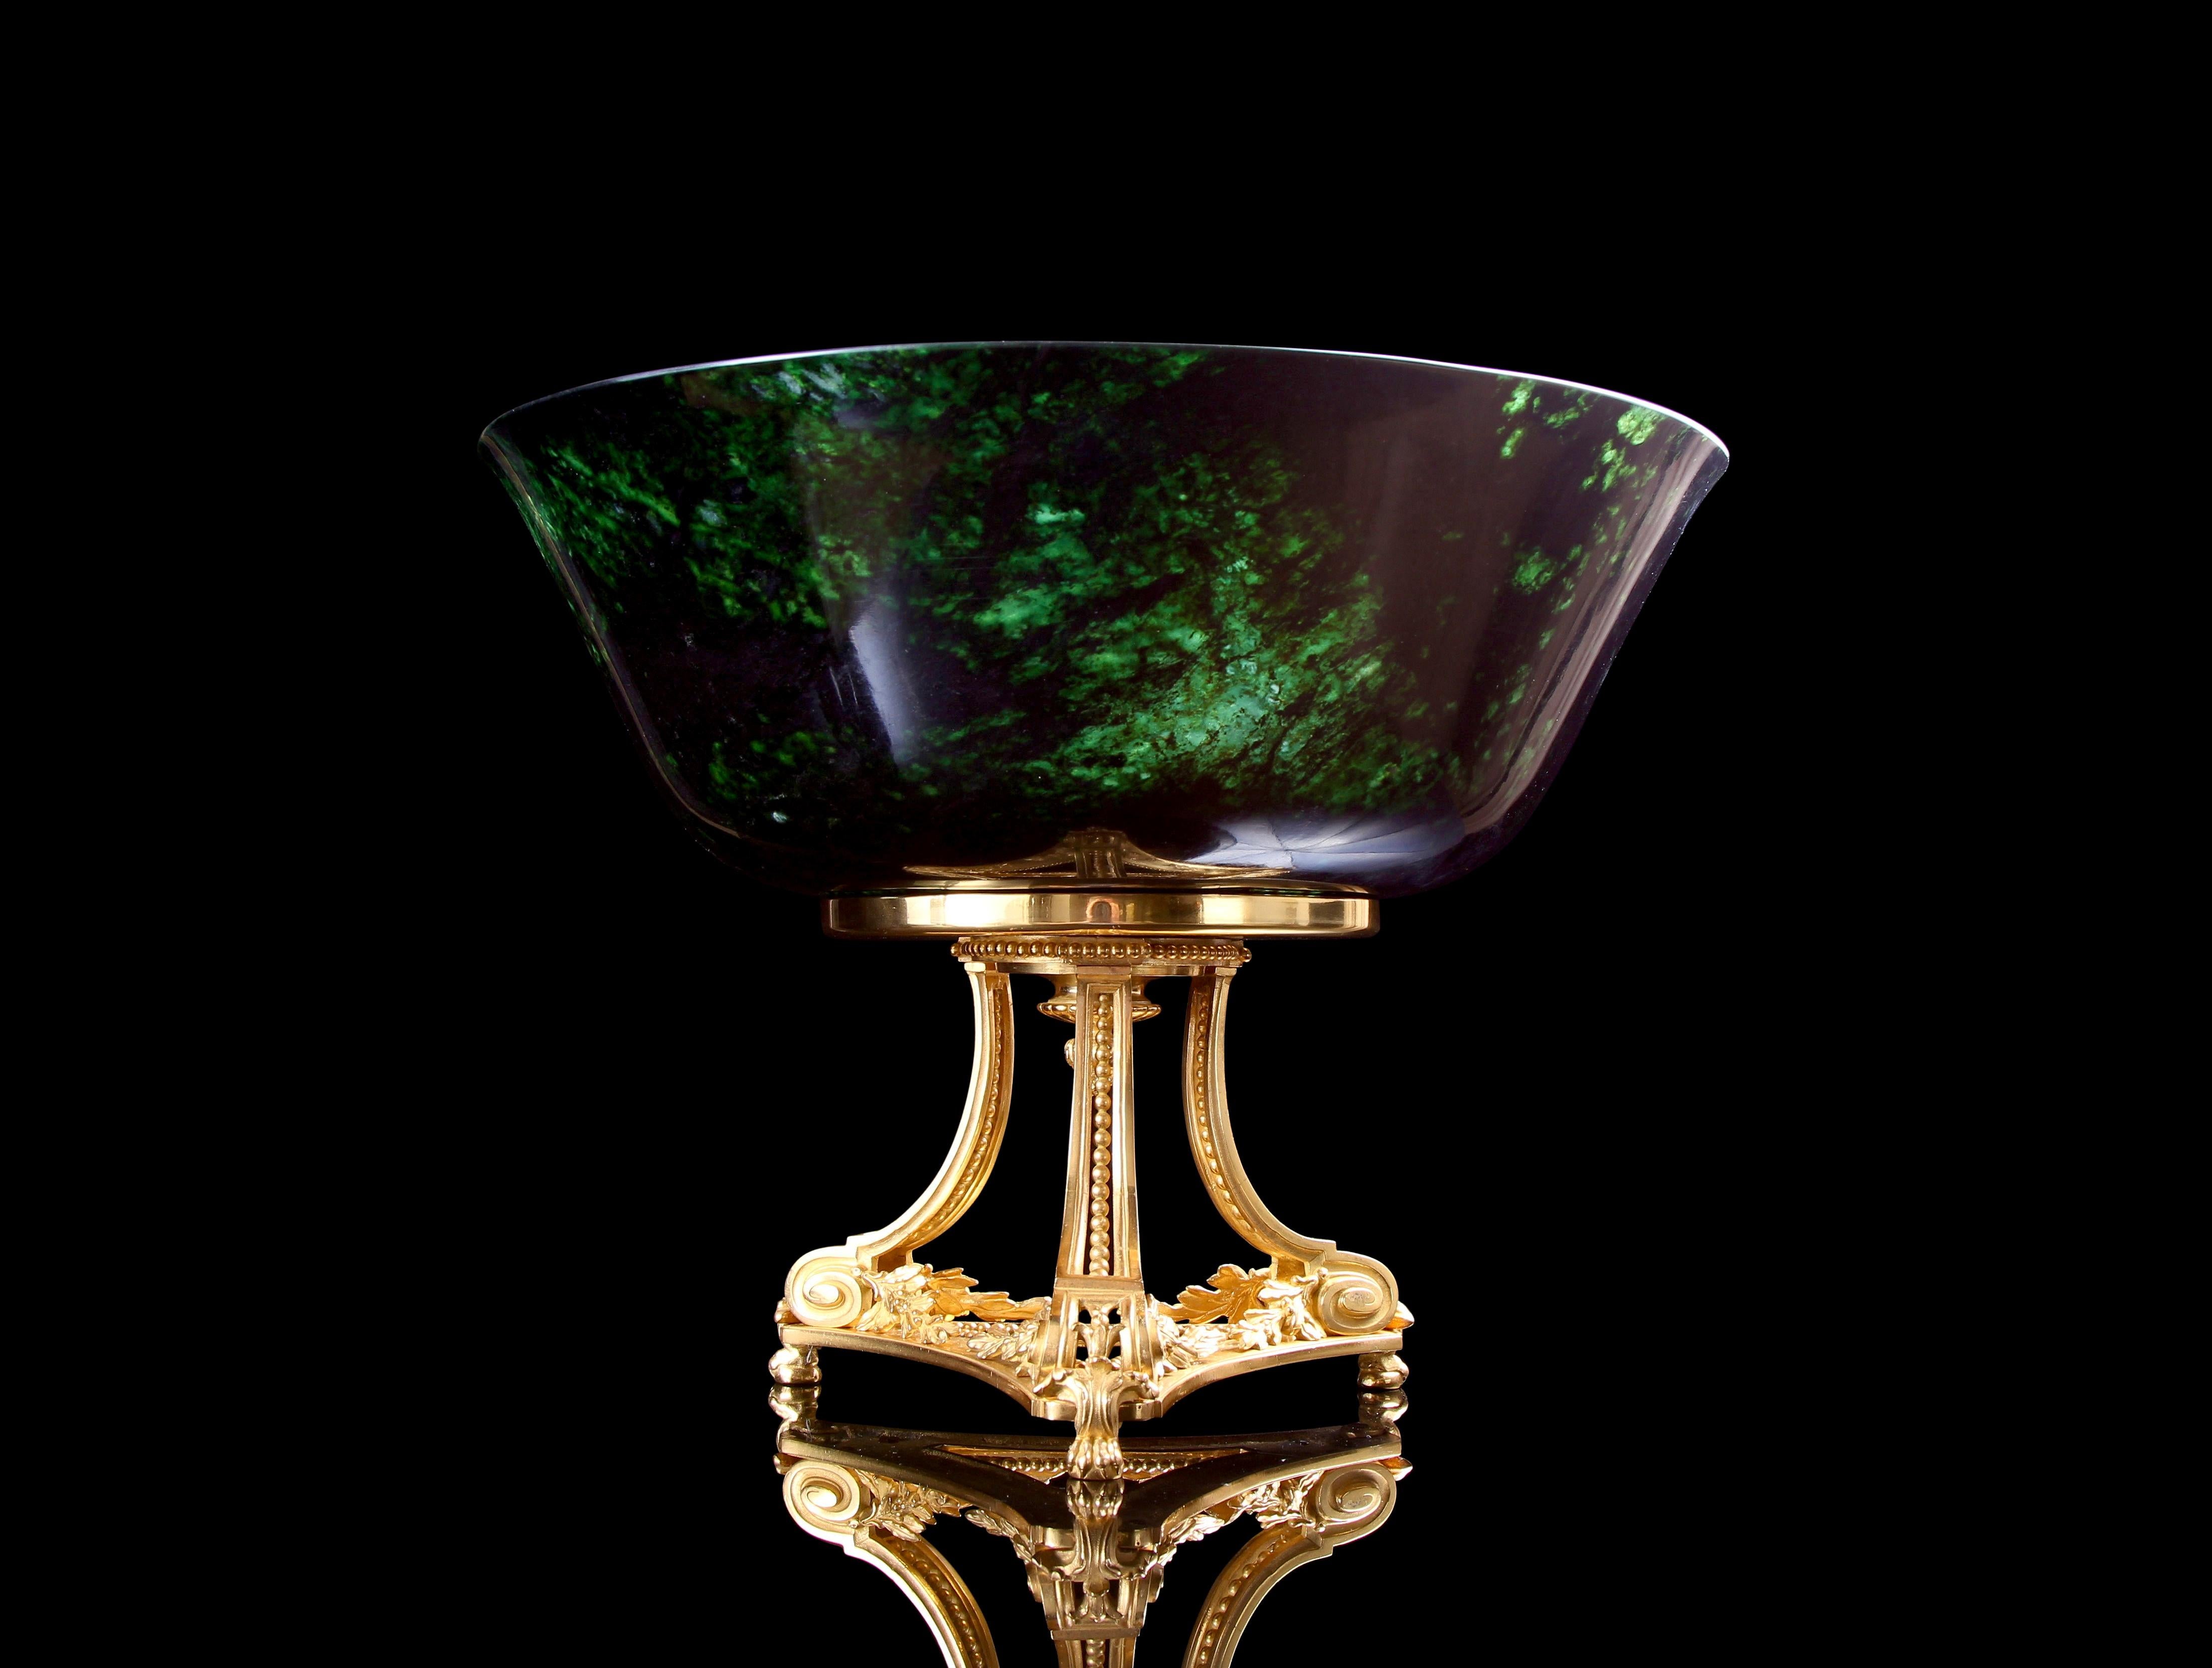 Magnificent Grand Scale Late 18th Century Qianlong Period Spinach Green Jade Bowl On 19th Century Gilt Bronze Stand By Henri Picard. To have created a sculptural bowl of this exceptionally fine form & scale, from this most highly prized & valuable